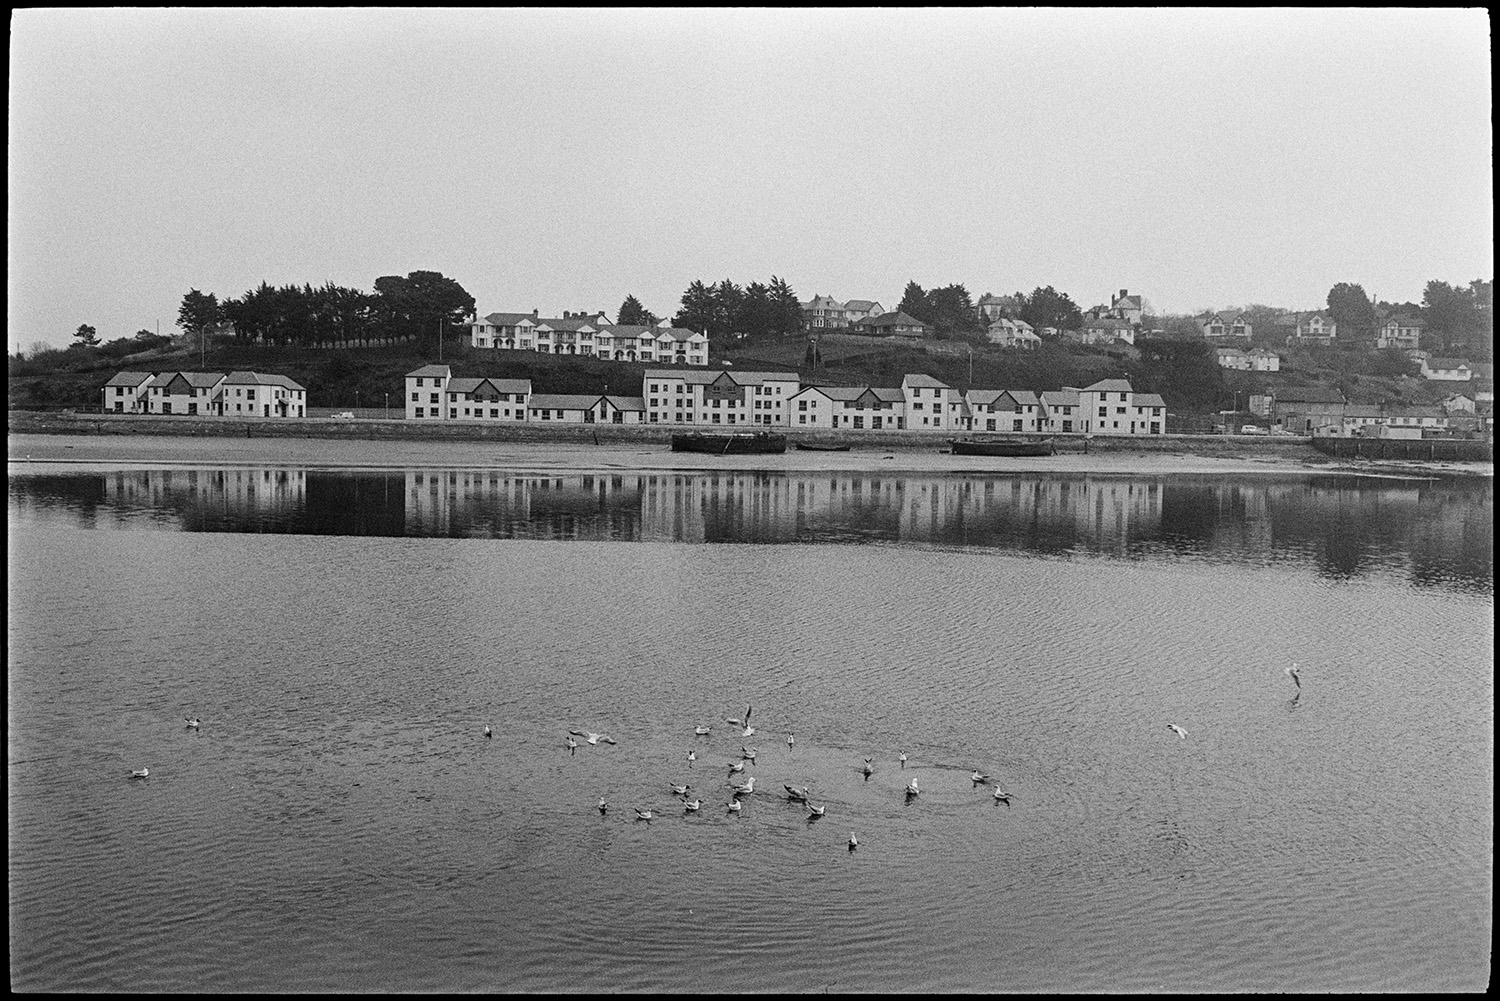 River and quay, oarsmen, fishermen mending nets, old bridge in background, fishing boats. 
[Seagulls on the River Torridge at Bideford. Boats are moored on the opposite bank of the river and houses can be seen on the river front.]